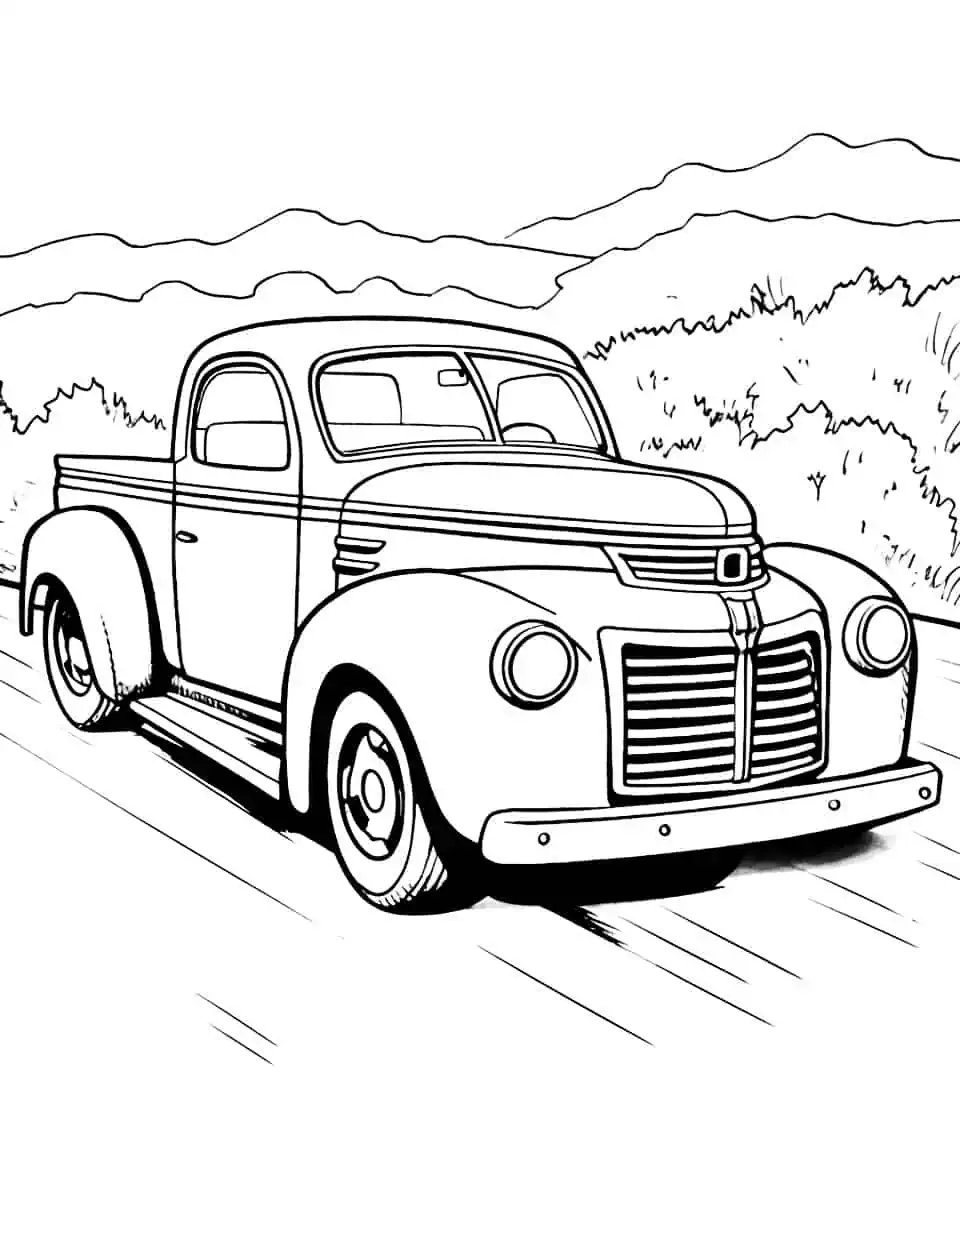 Vintage Truck Car Coloring Page - A beautifully designed vintage truck ready to be colored.